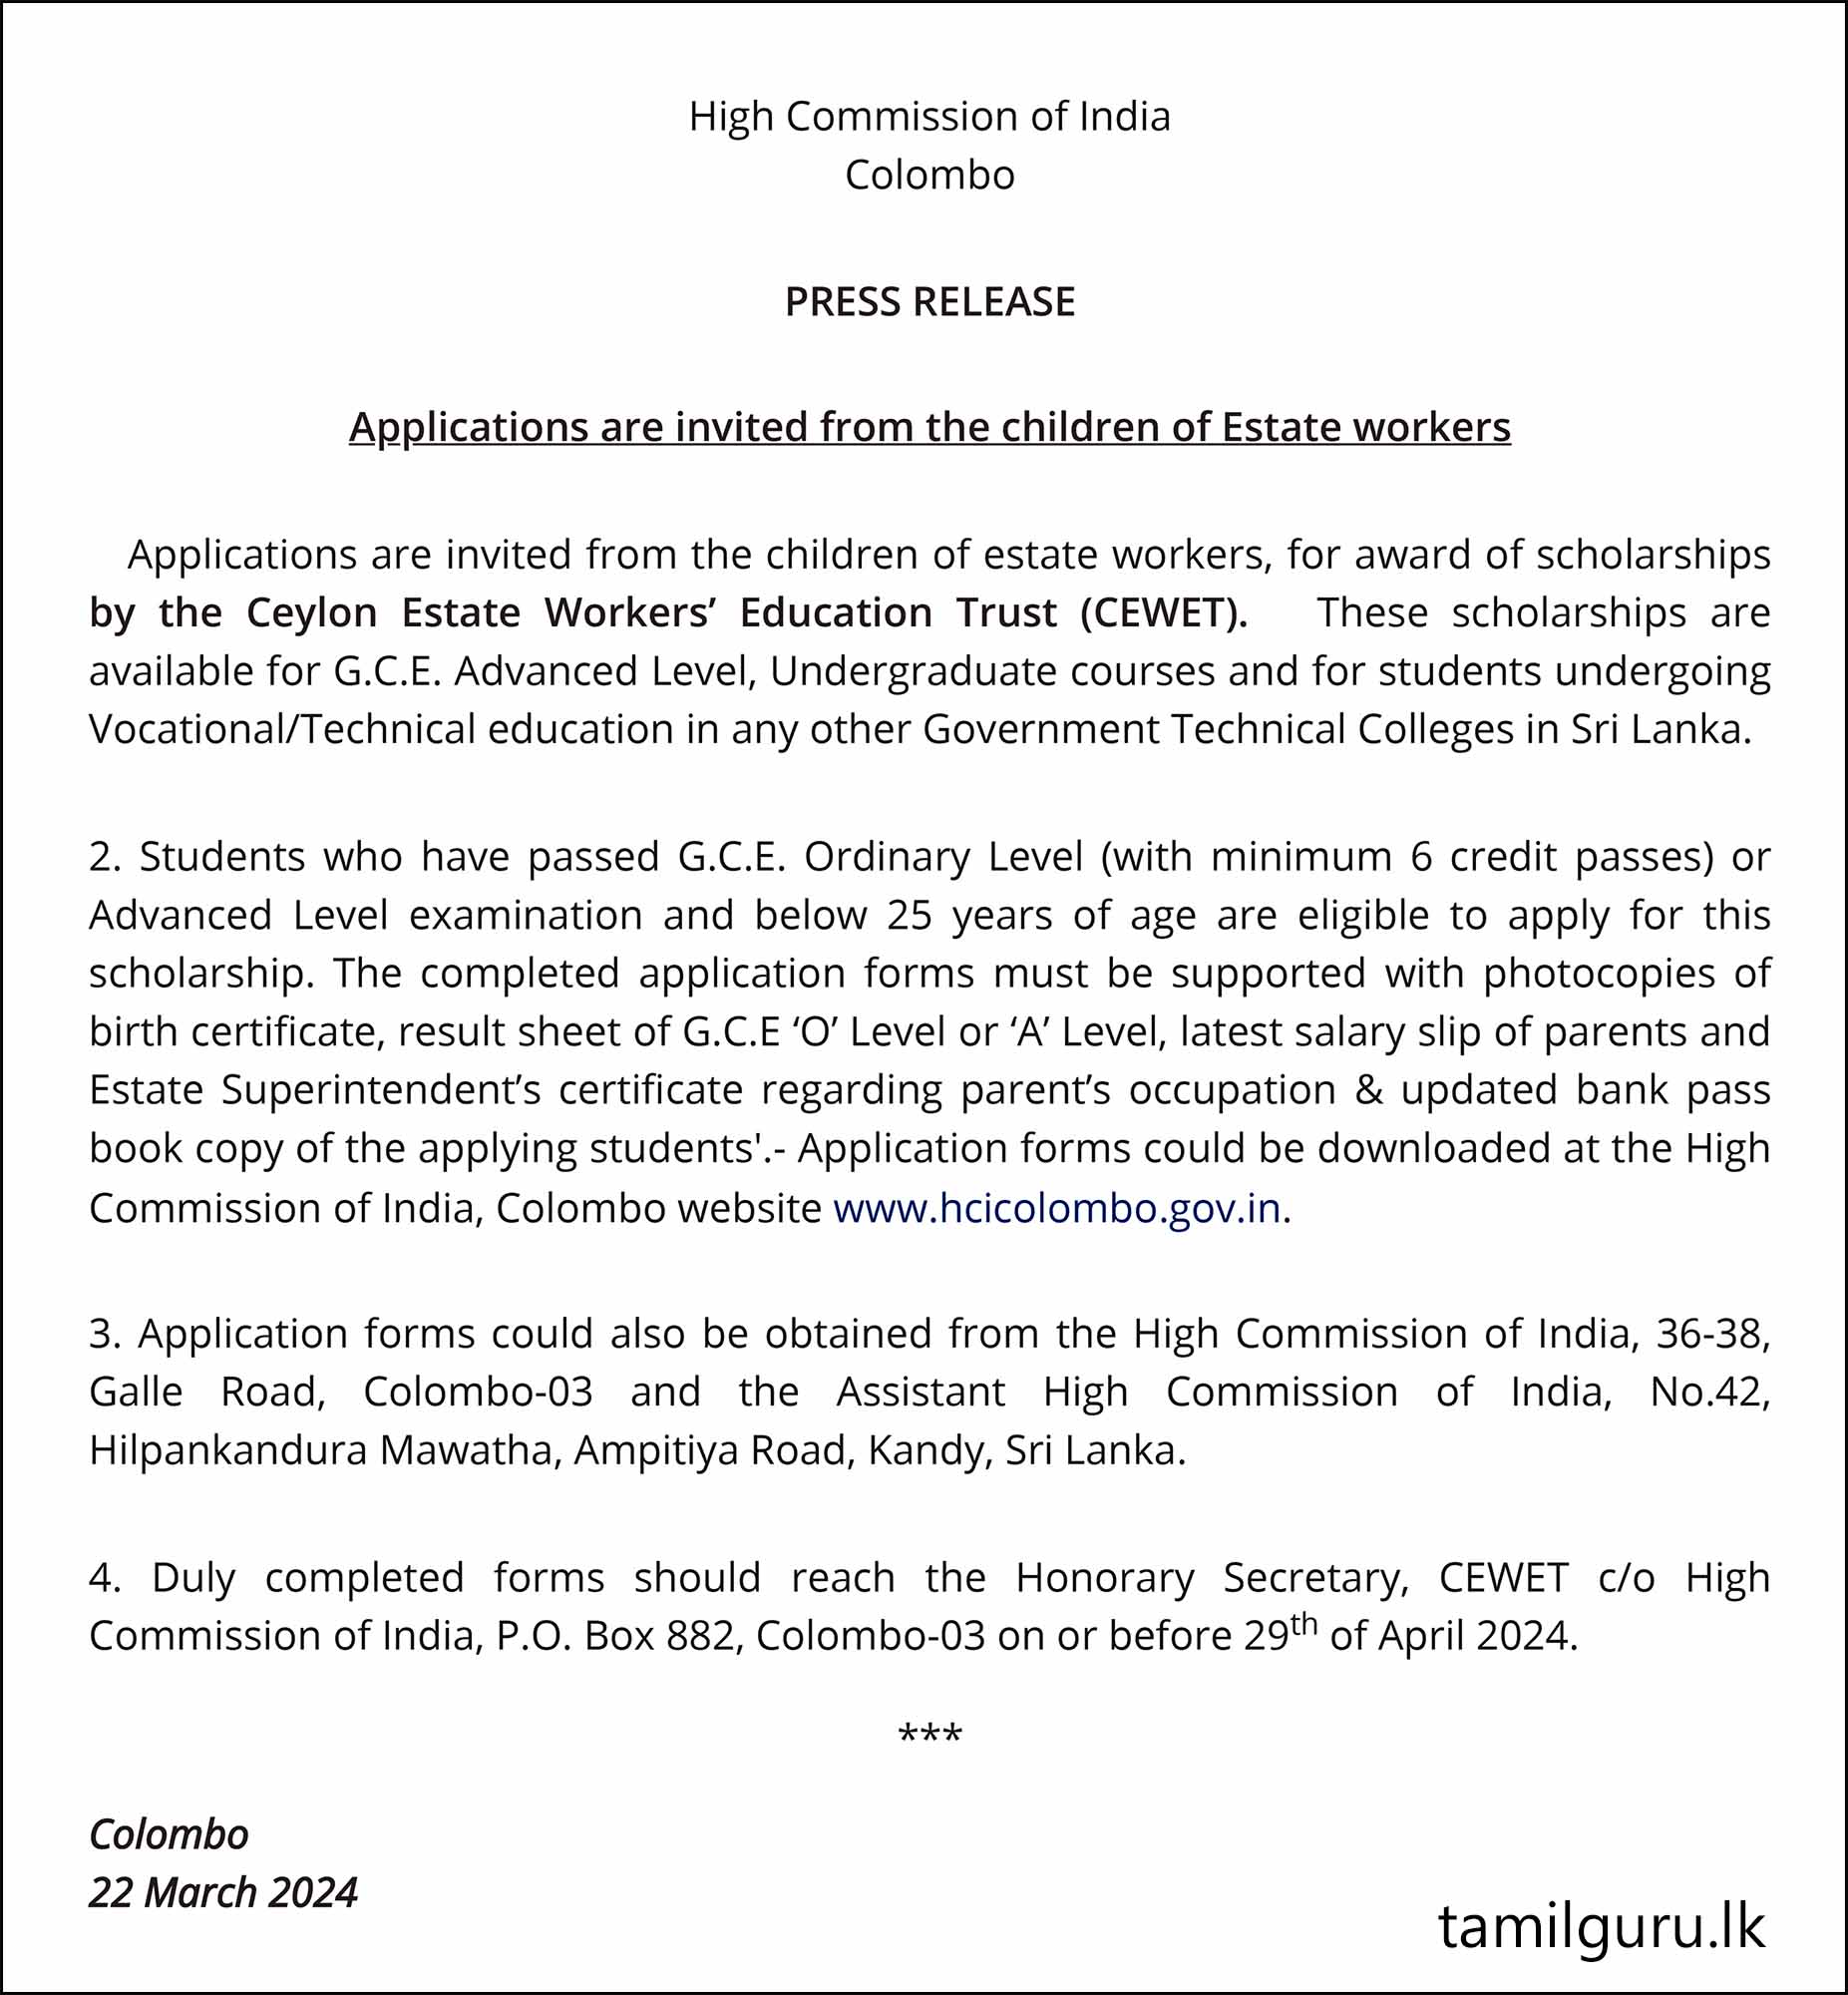 Indian Government (CEWET) Scholarships for Estate Workers’ Children - 2024